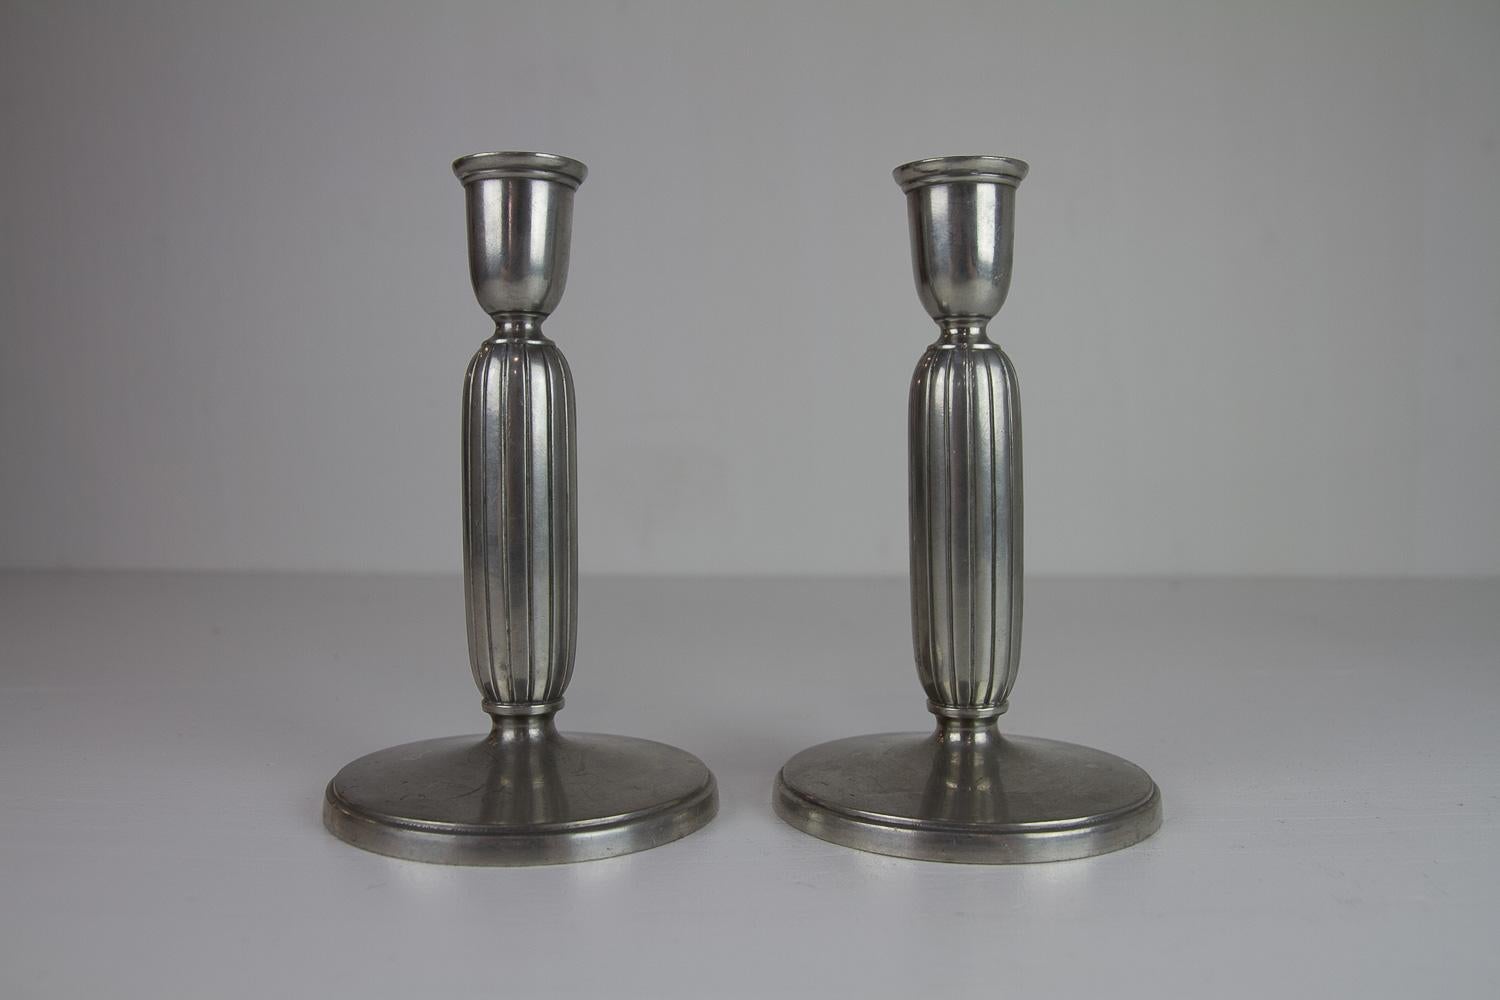 Danish Art Deco Pewter Candle Holders by Just Andersen, 1930s. Set of 2. For Sale